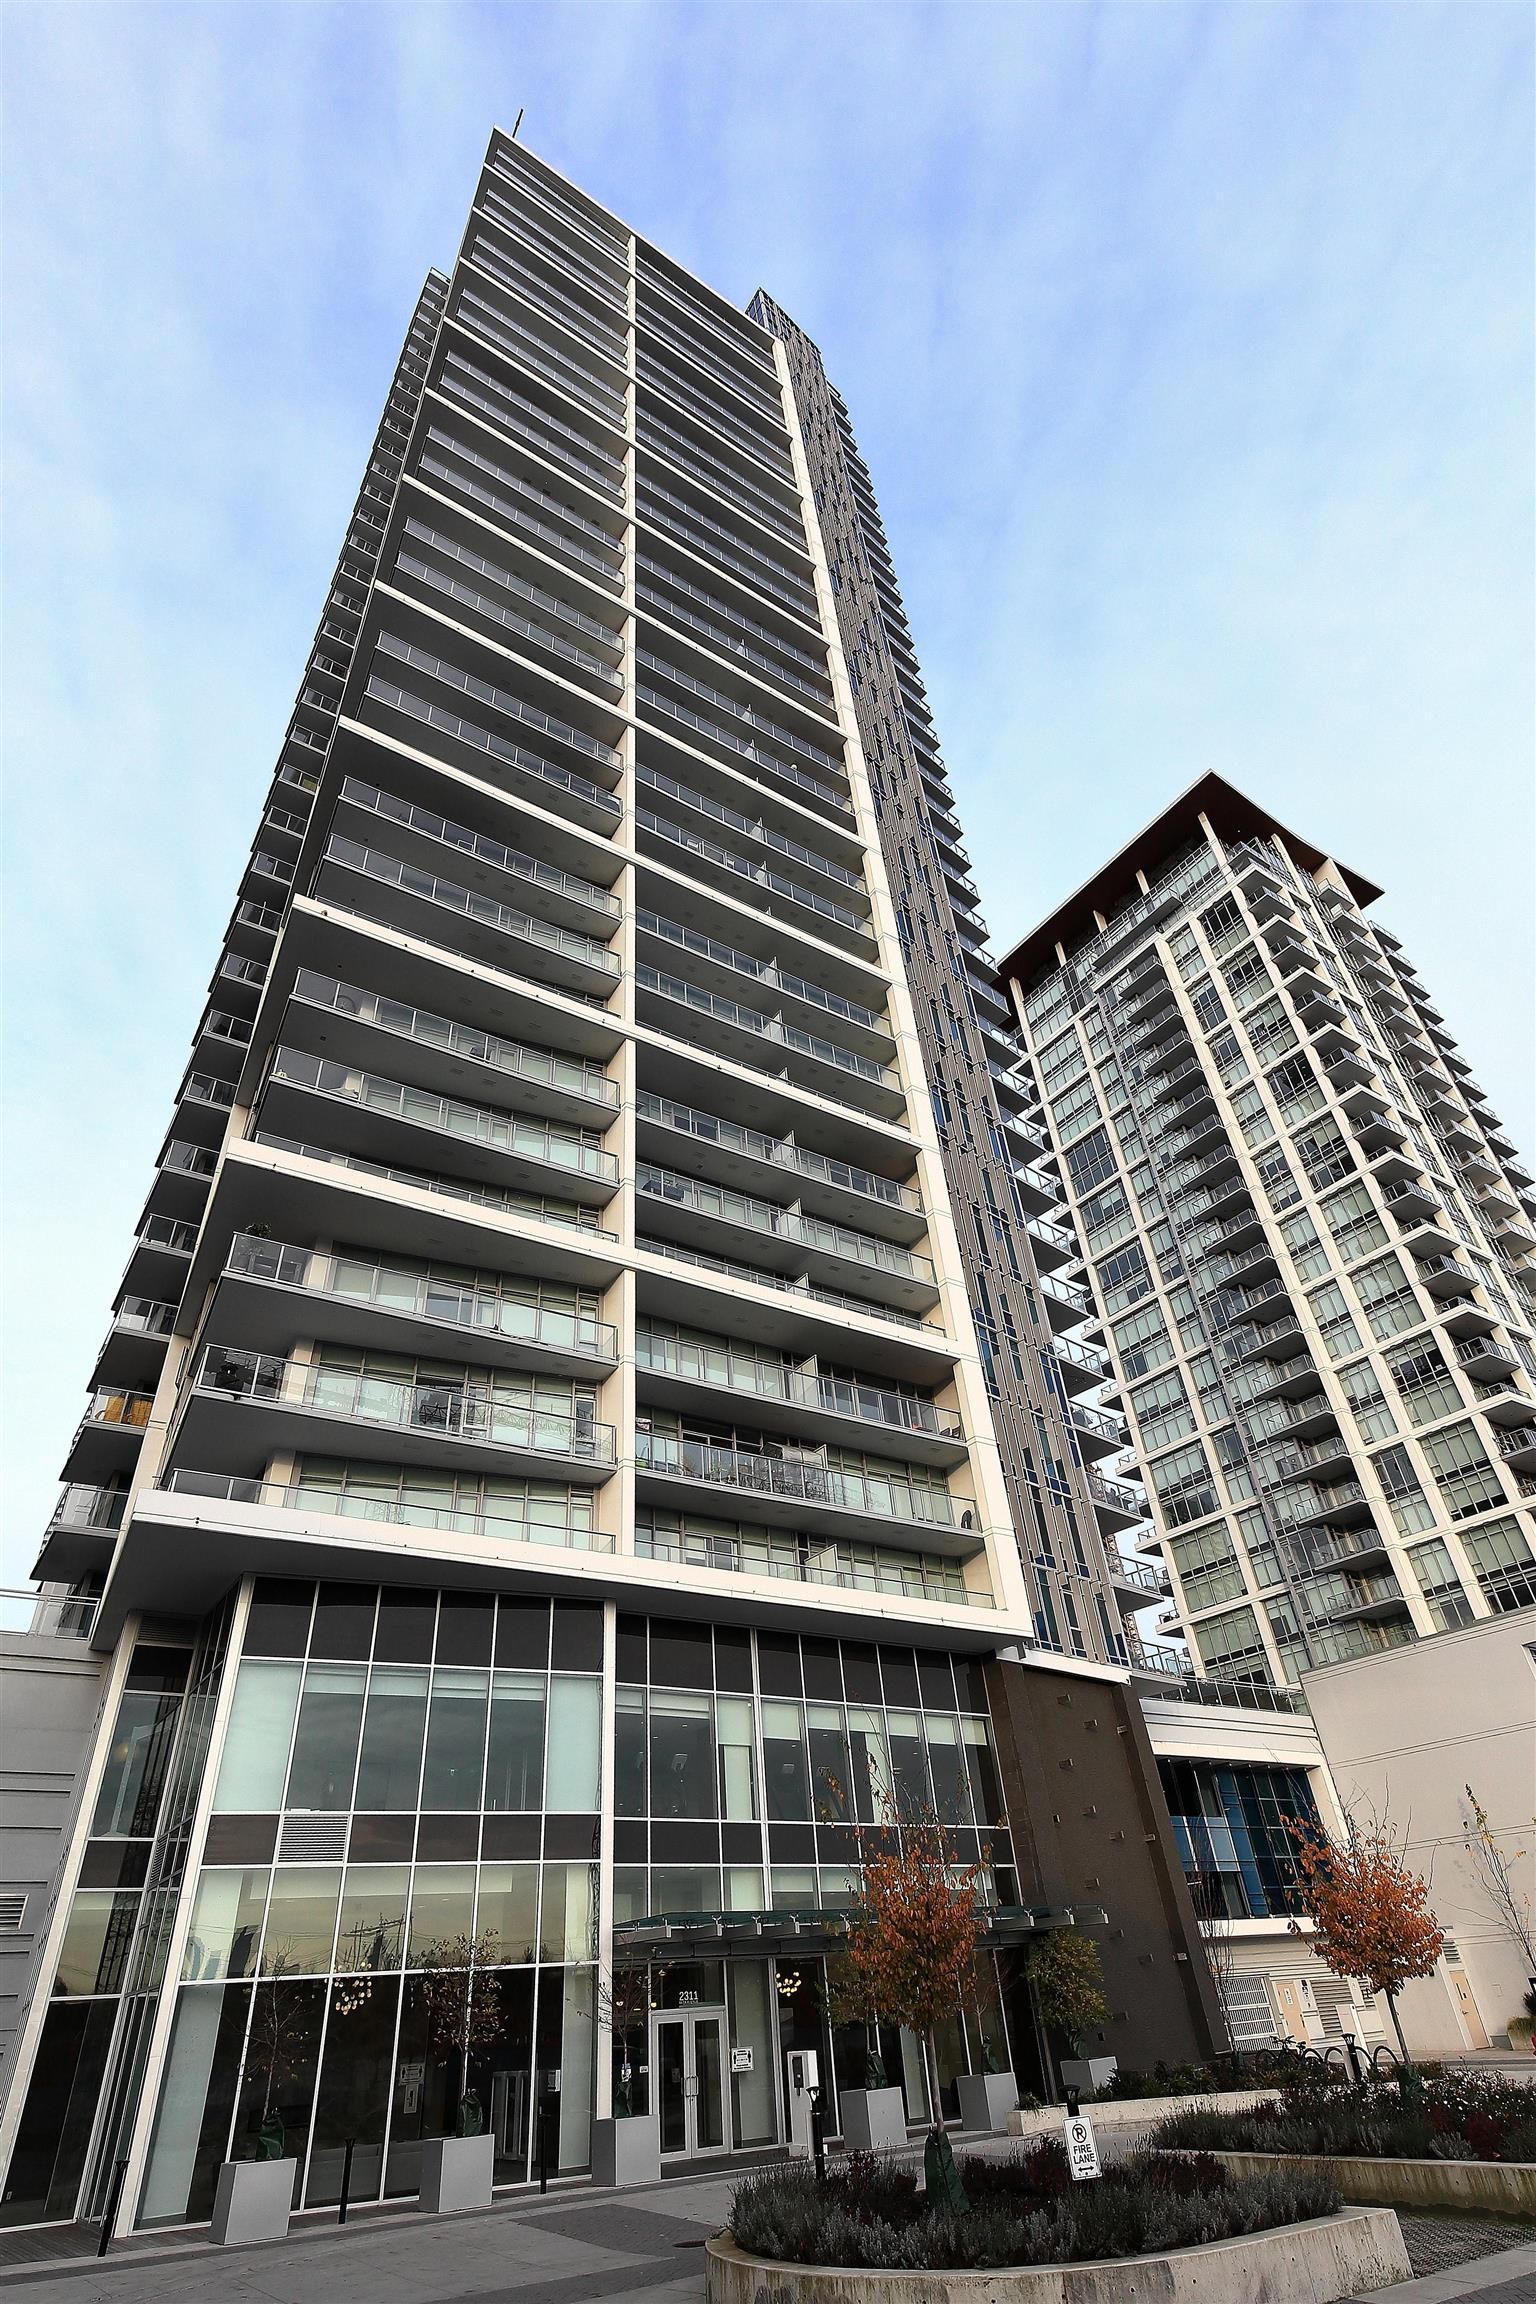 Main Photo: 2802 2311 BETA AVENUE in Burnaby: Brentwood Park Condo for sale (Burnaby North)  : MLS®# R2634972